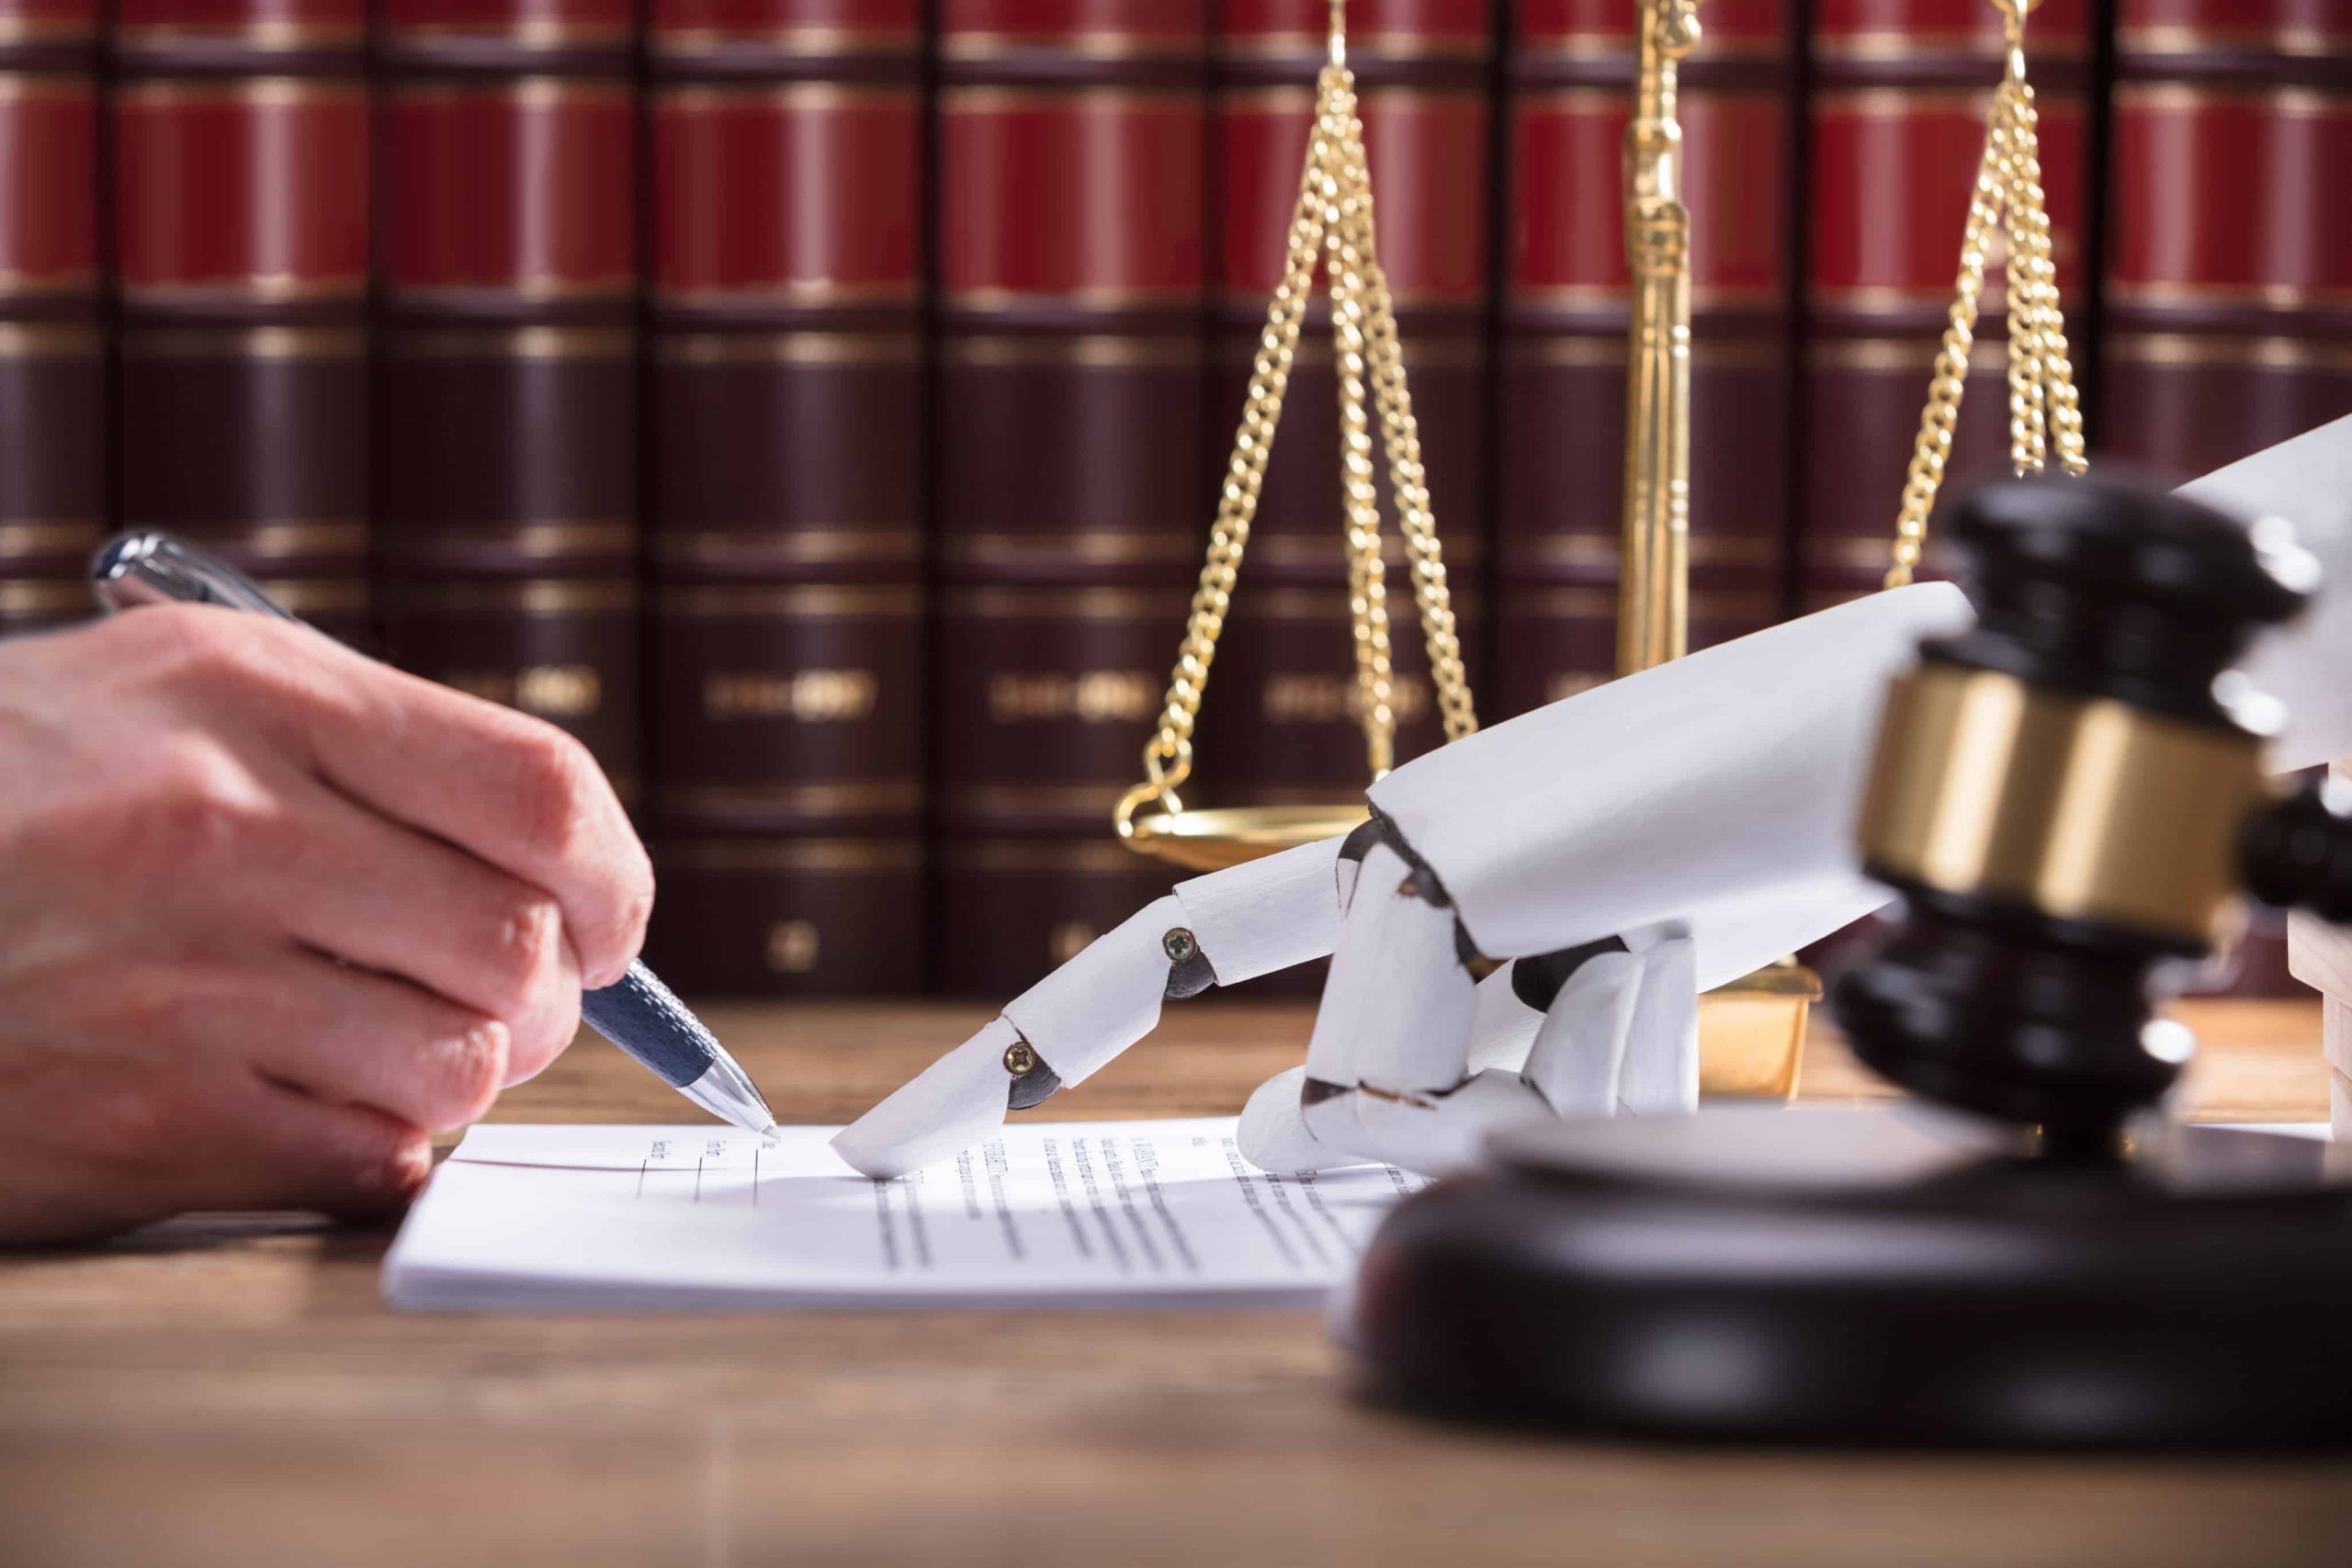 Robot Lawyer Aims To Make Legal Representation Affordable